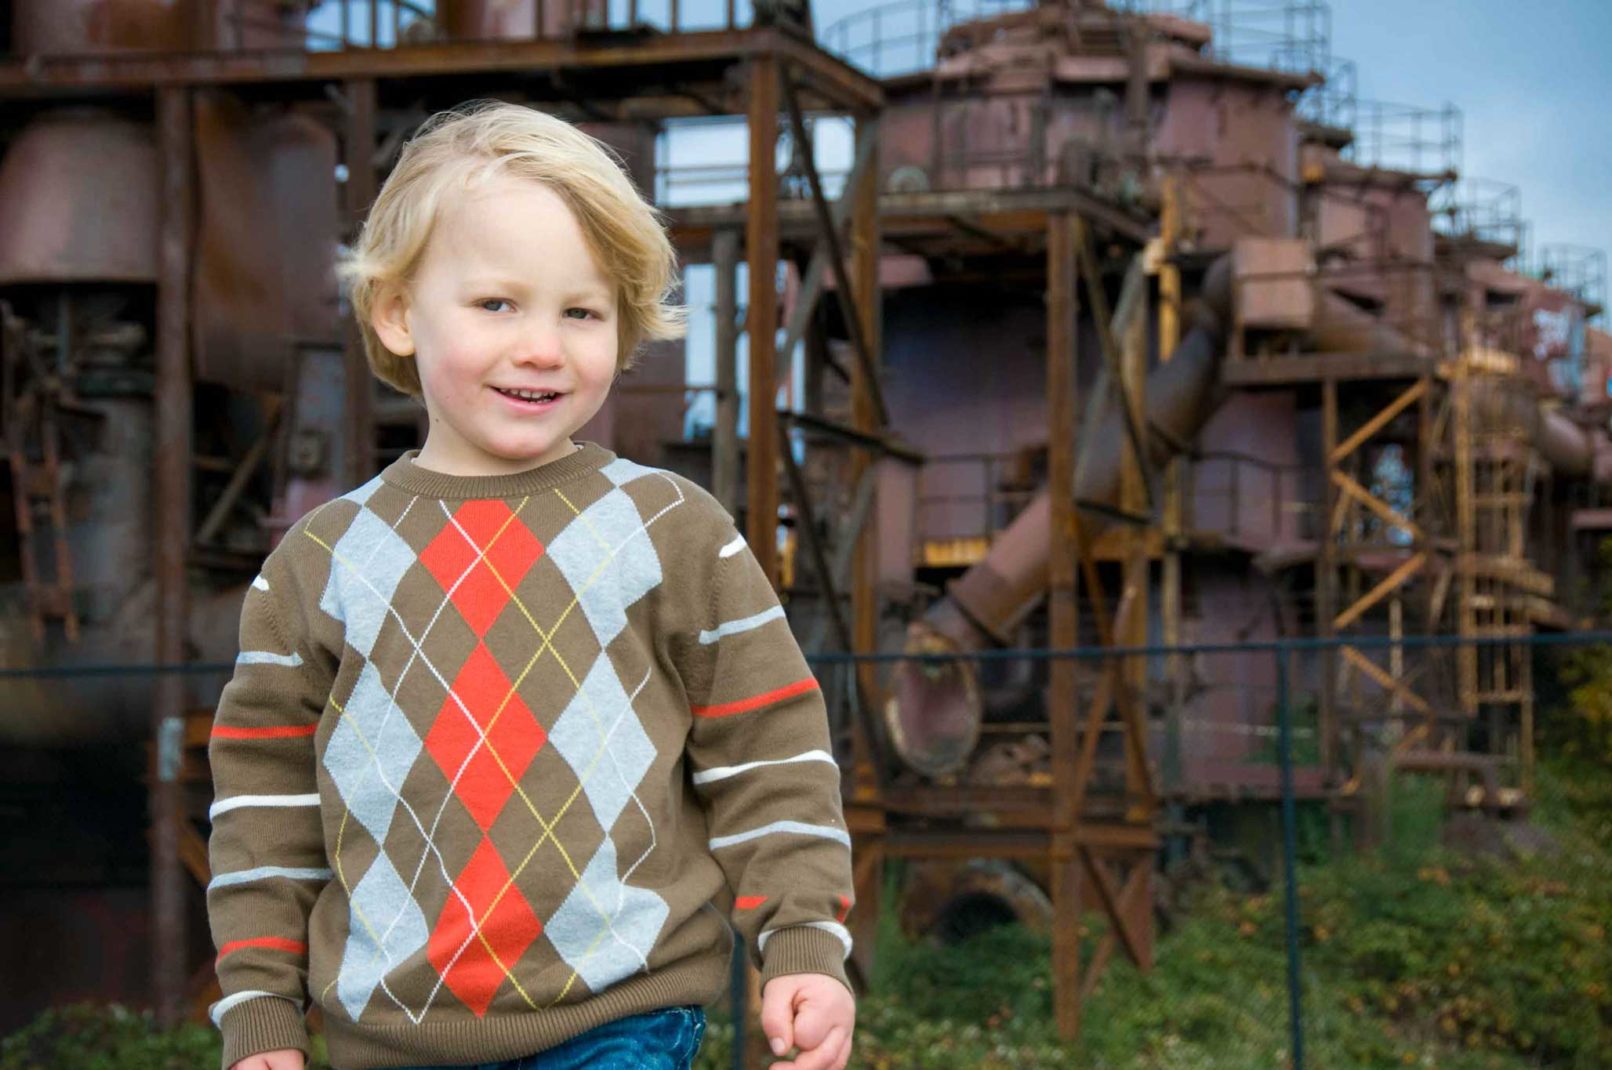 portrait of a young boy in an argyle sweater in front of abandoned buildings.